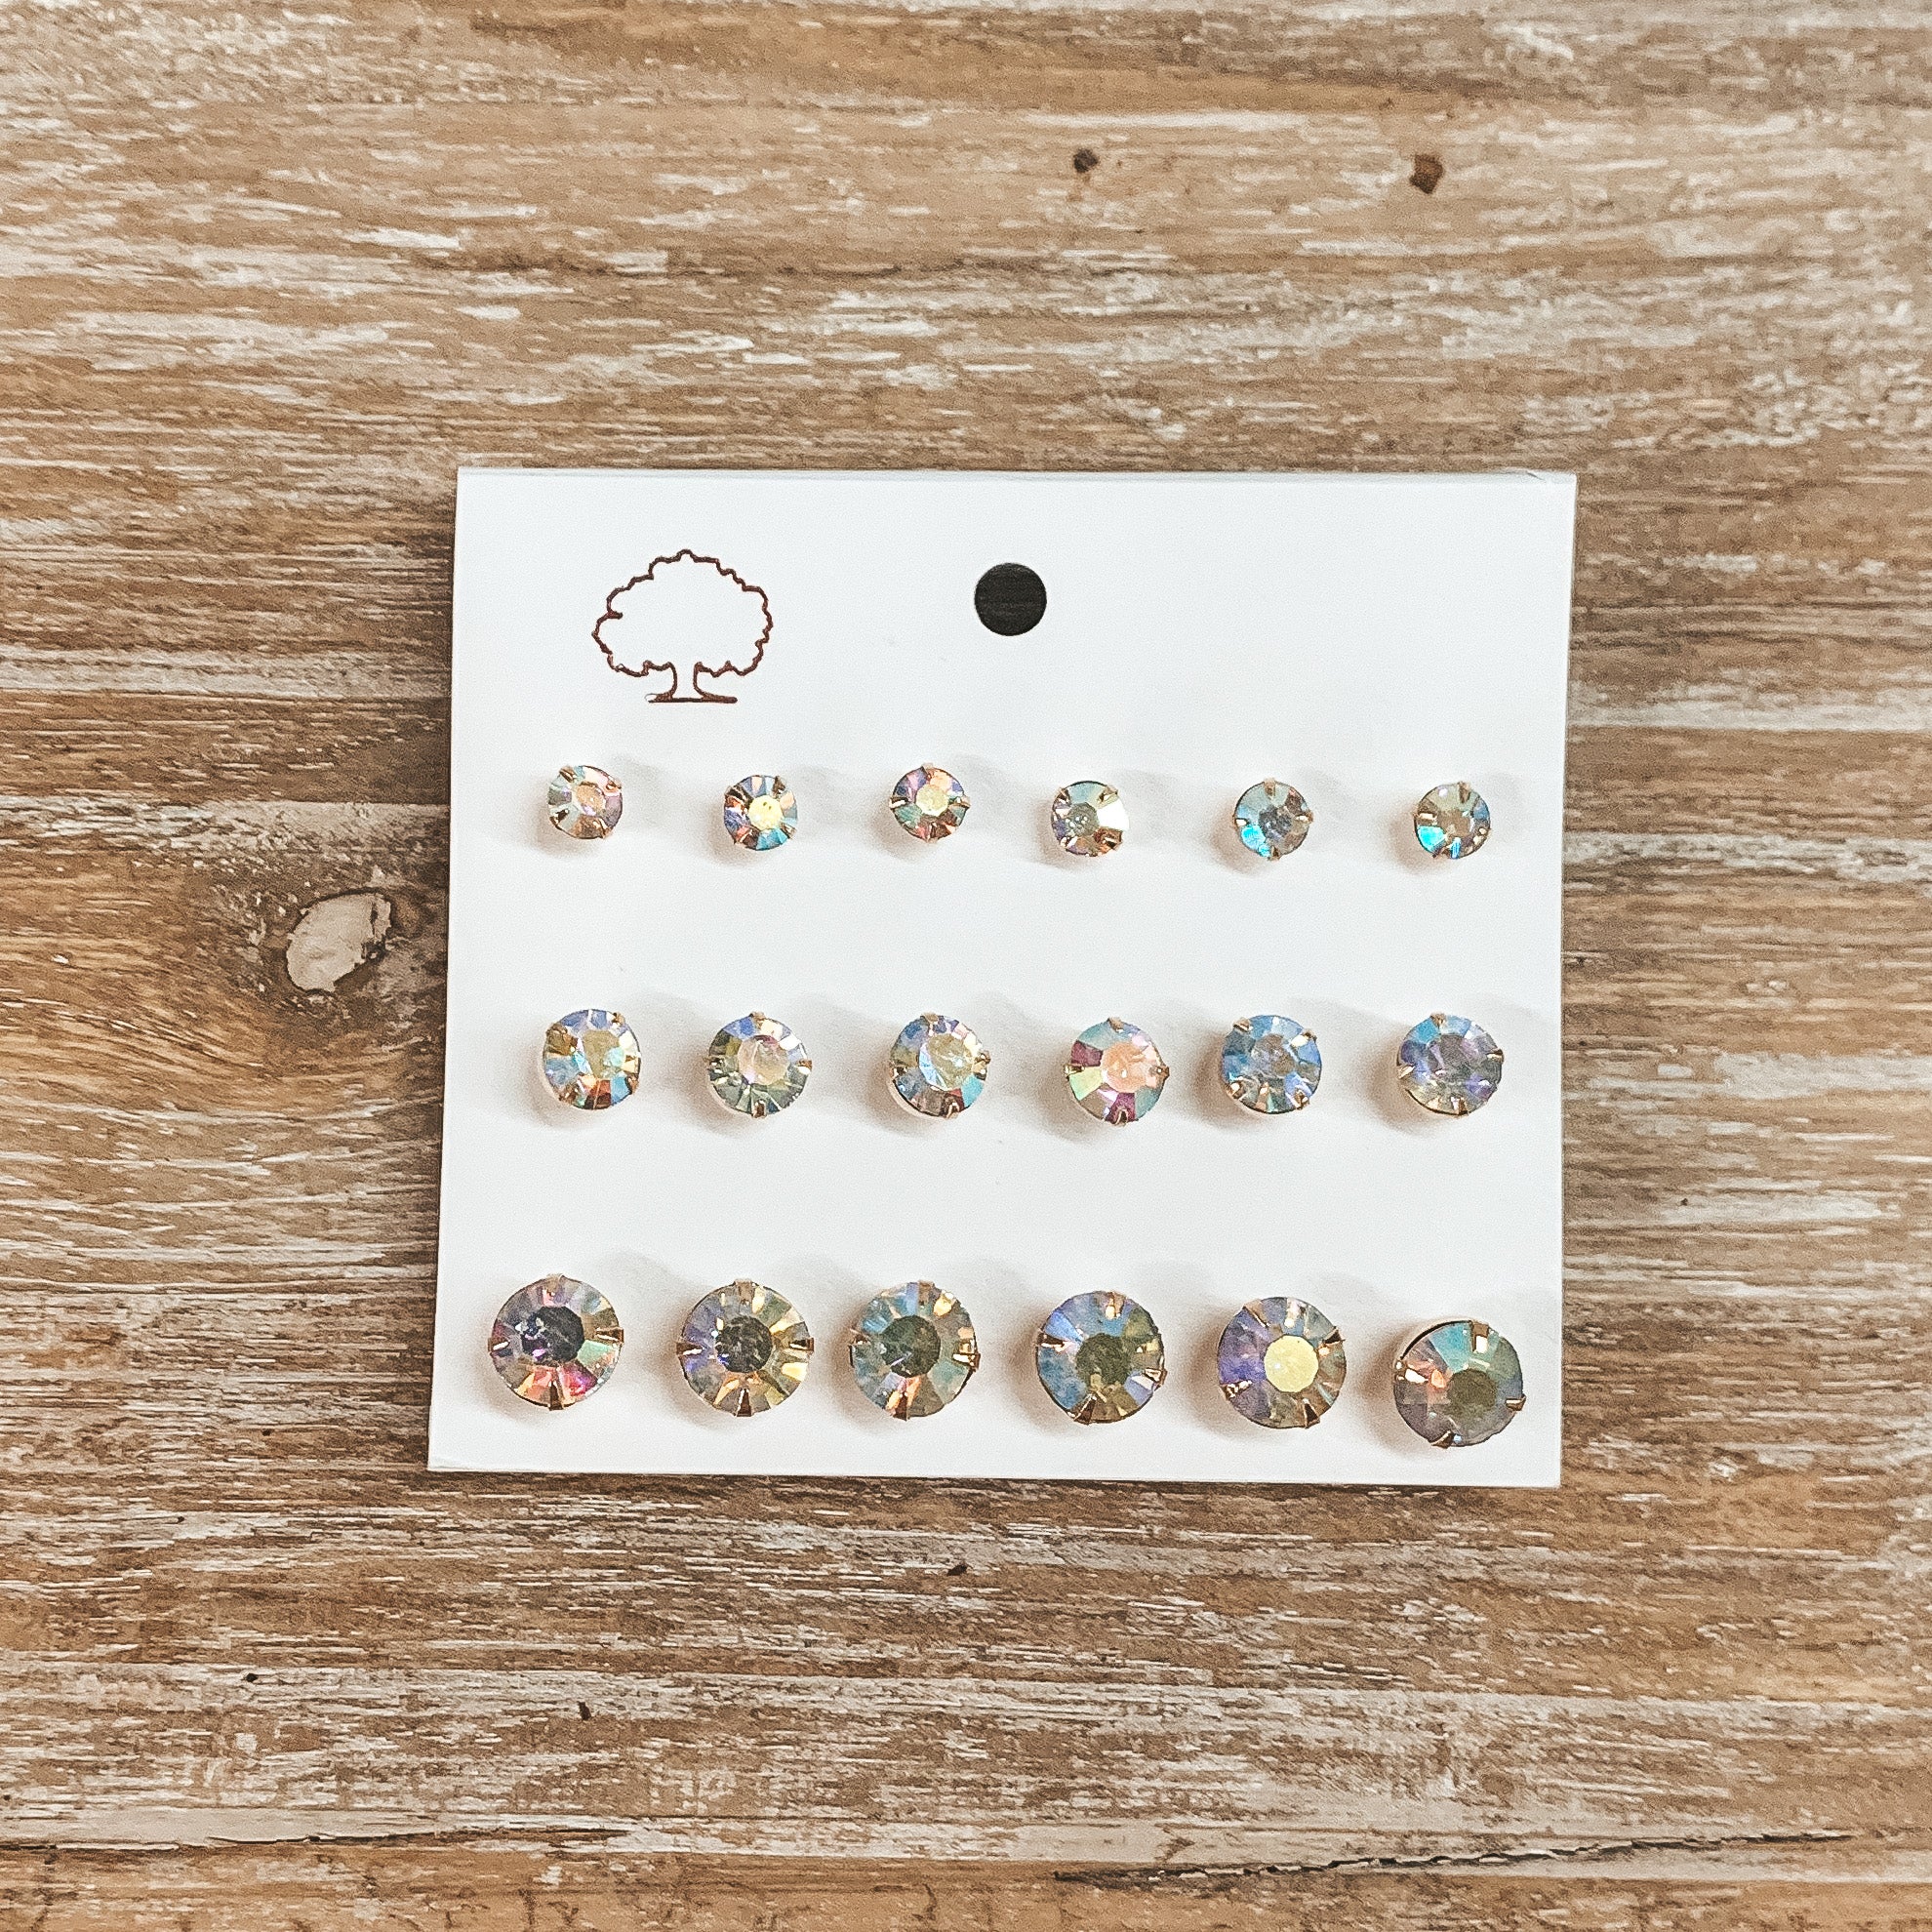 This is a pack of nine ab crystal stud earrings in different sizes. These earrings are on a white earring card holder and taken on a wooden slate.